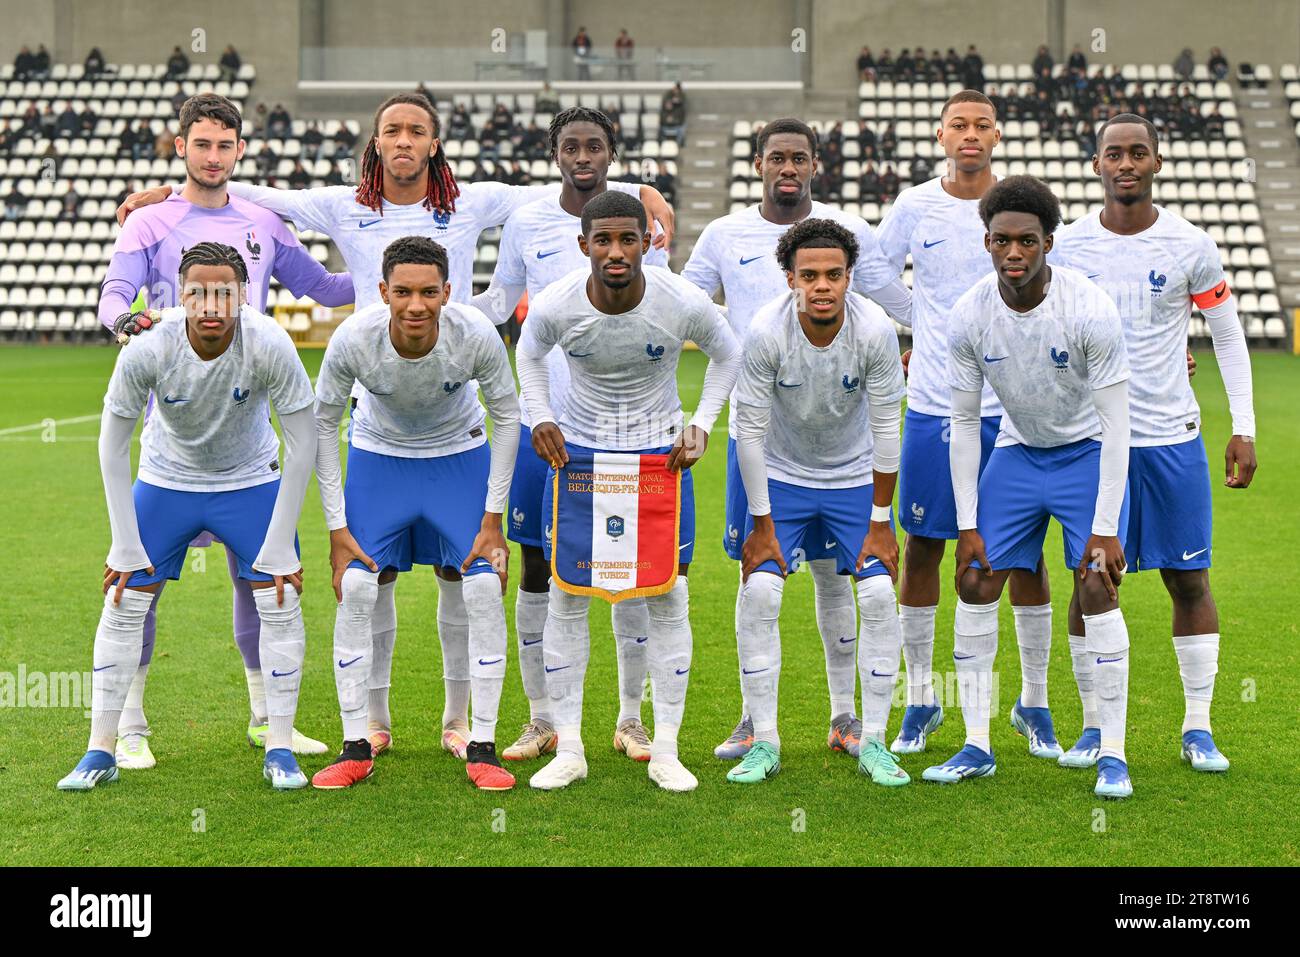 Tubize, Belgium. 21st Nov, 2023. players of France with goalkeeper Mathieu PATOUILLET (1) of France, Brahim TRAORE (5) of France, Joseph NDUQUIDI (11) of France, Rudy KOHON (4) of France, Malamine EFEKELE (7) of France, Yoan KORE (15) of France, Wilson ODEBERT (8) of France, Edan DIOP (6) of France Mohamed-Ali CHO (19) of France, Therence KOUDOU (20) of France and Diabe BOLUMBU (3) of France pose for a team photo during a friendly soccer game between the national under 20 teams of Belgium and France on Tuesday 21 November 2023 in Tubize, Belgium . Credit: sportpix/Alamy Live News Stock Photo